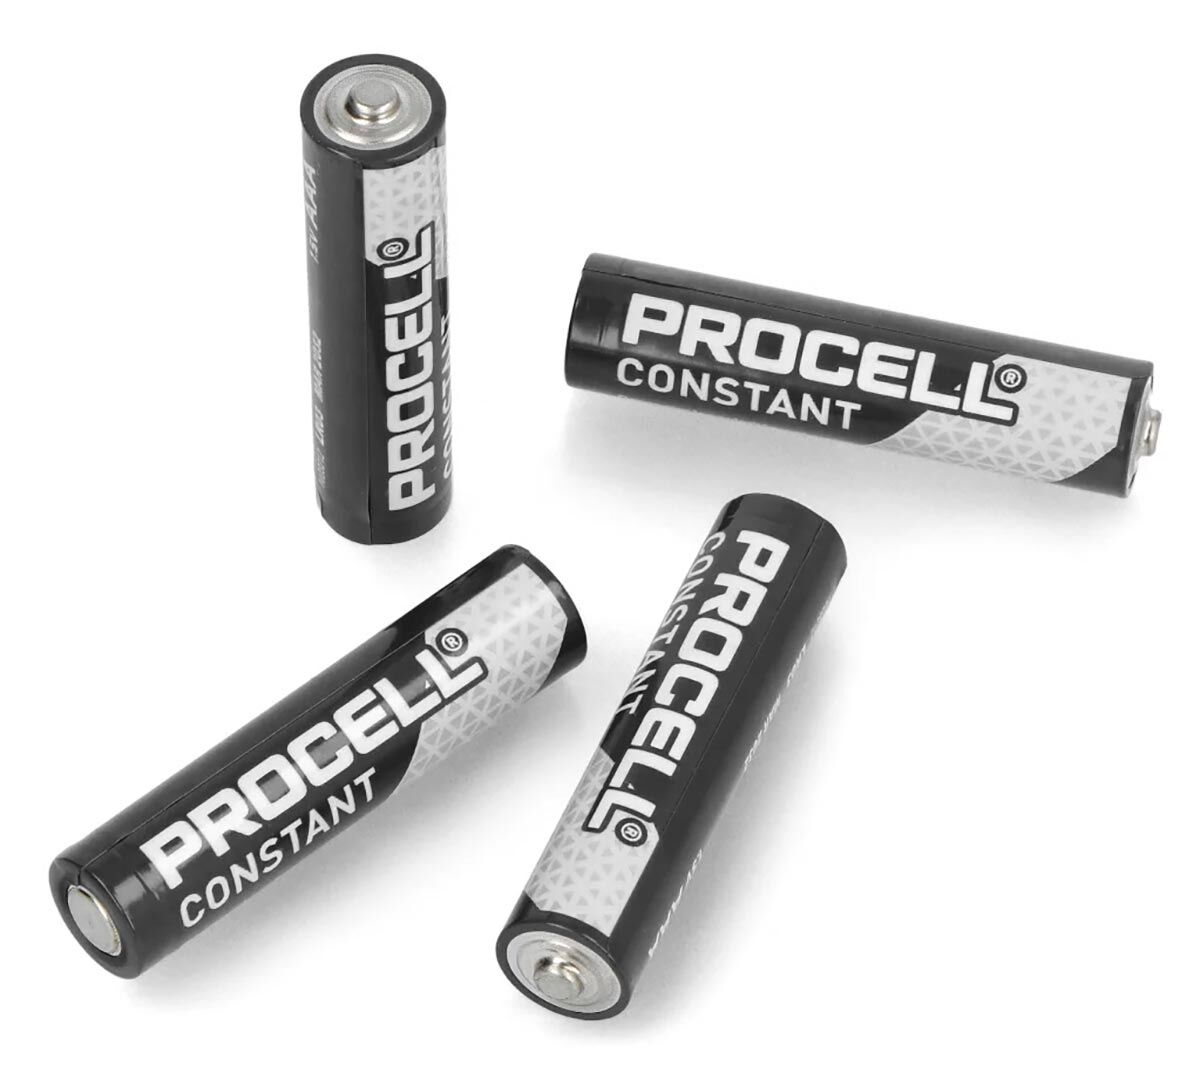 Элемент питания LR 03 Duracell Procell CONSTANT 1.5V Box10 2